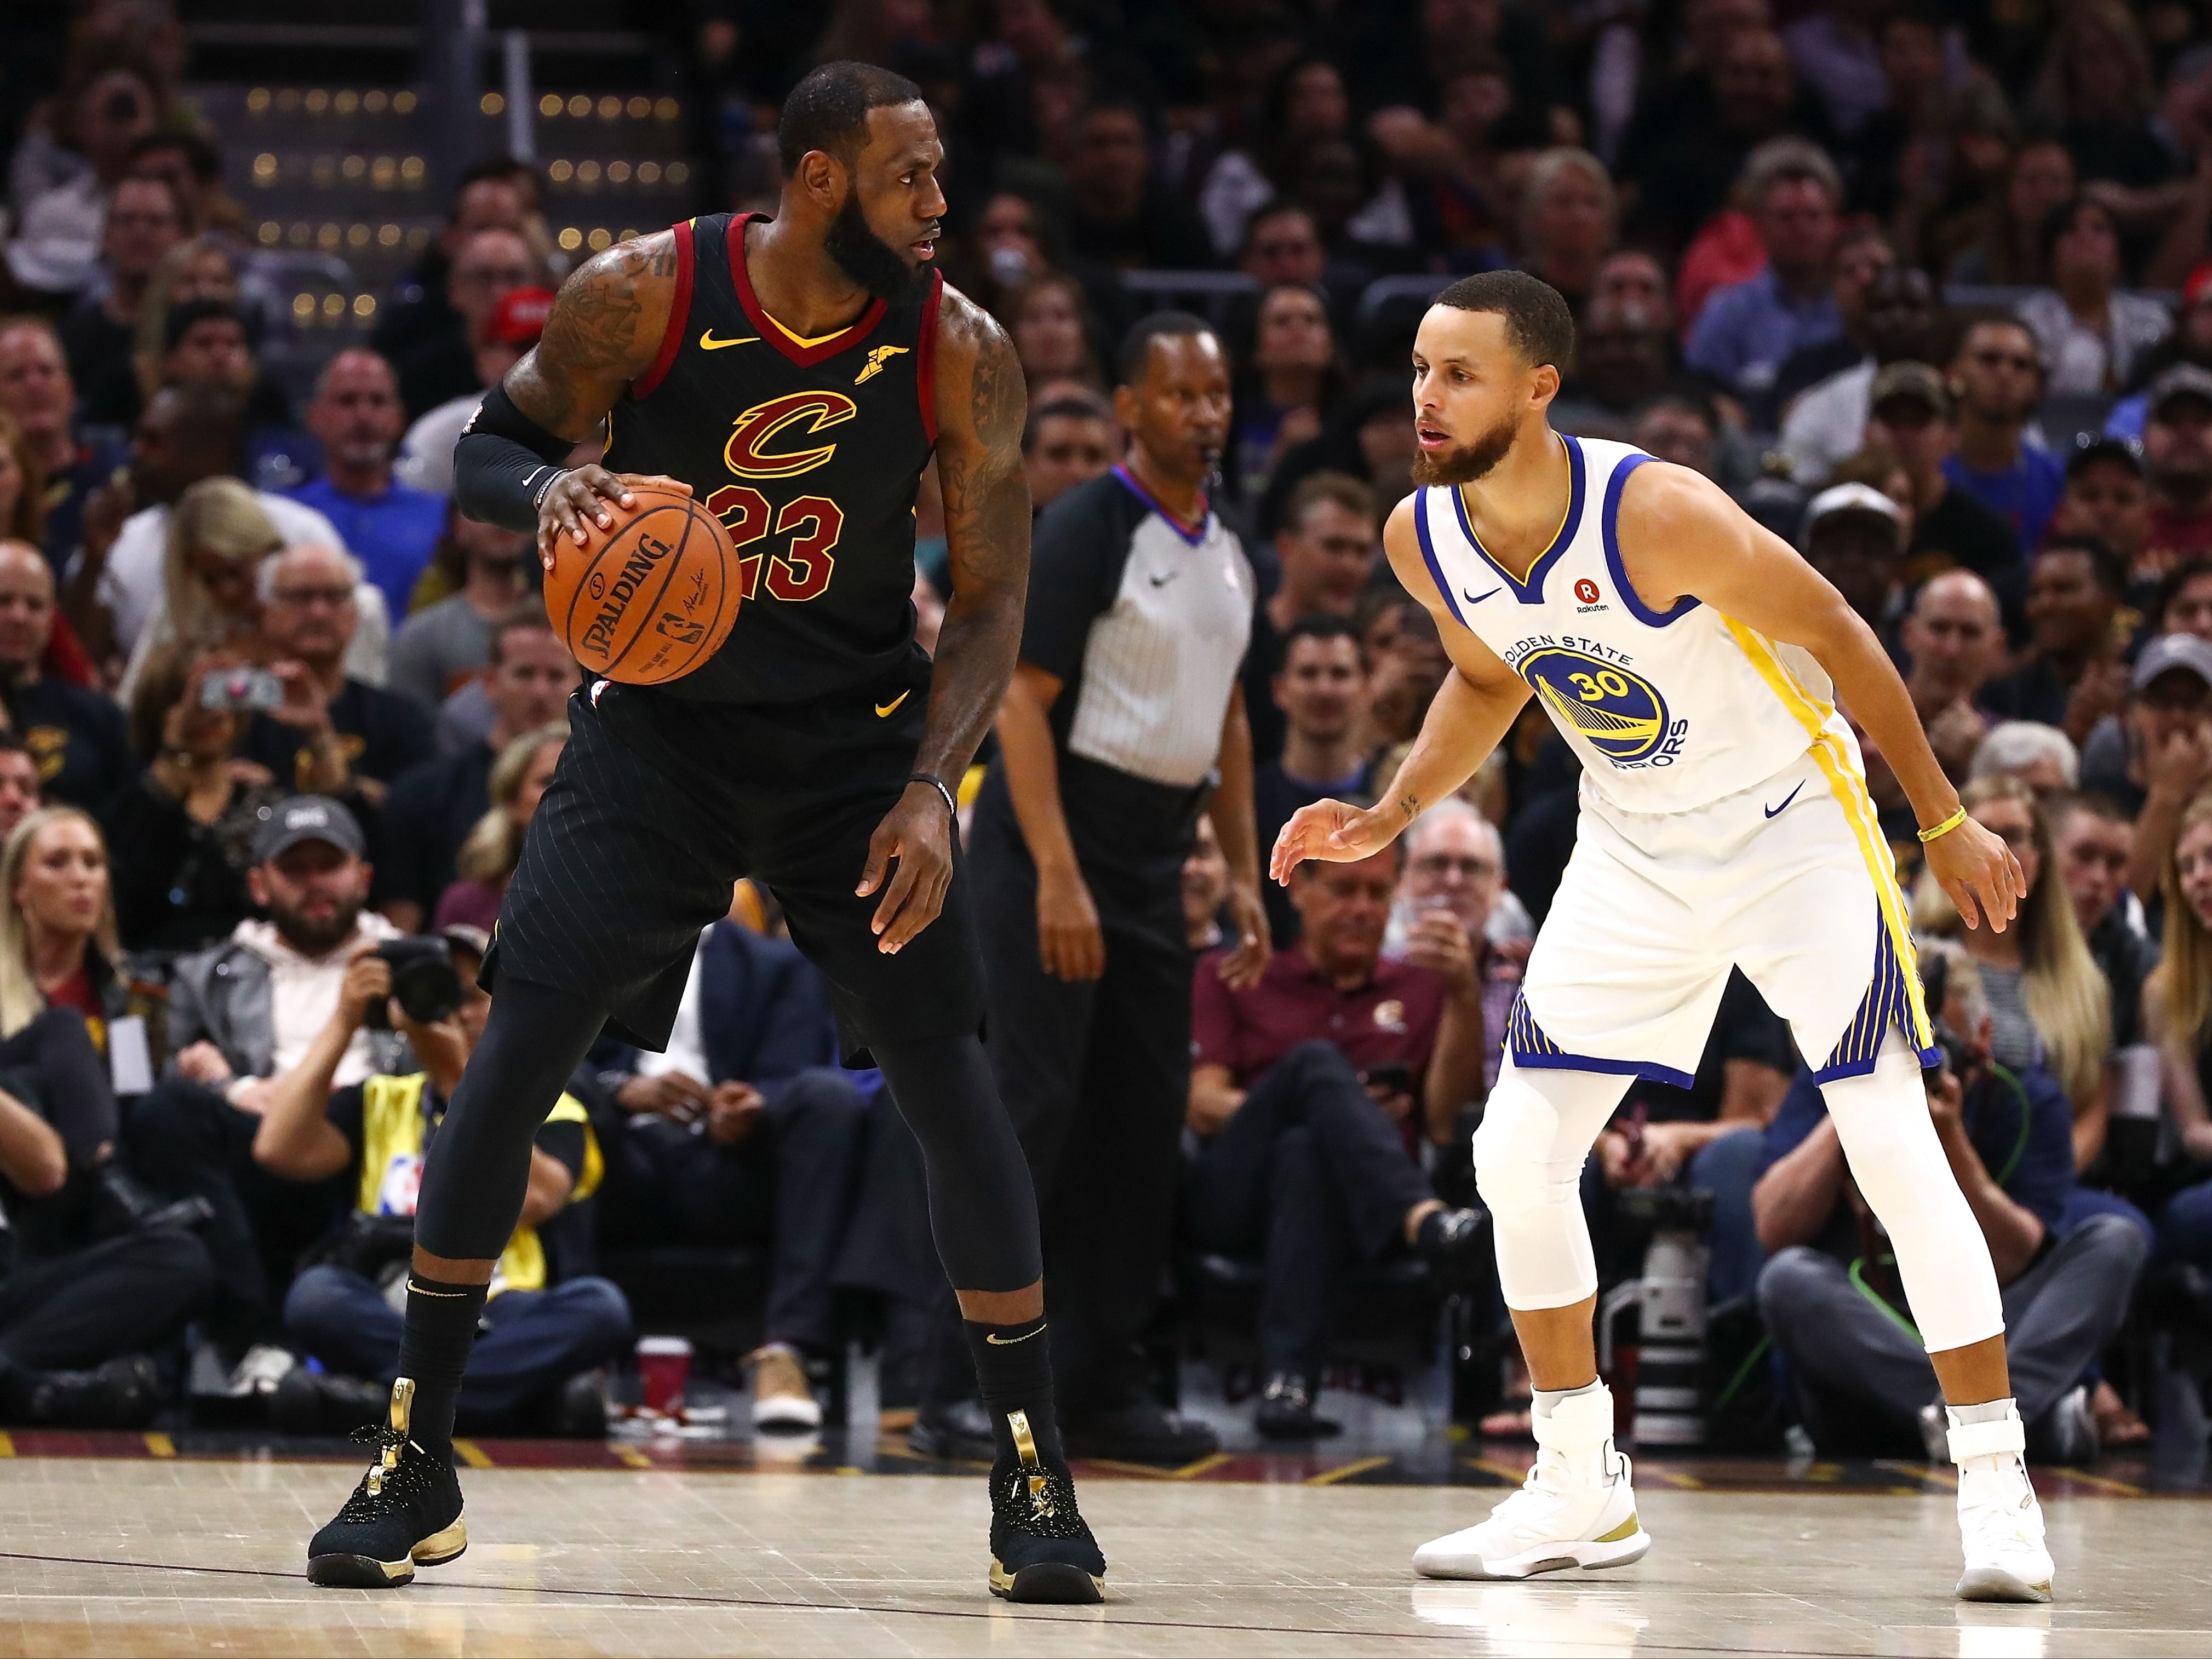 LeBron James and Steph Curry in the 2018 NBA Finals - Game Four